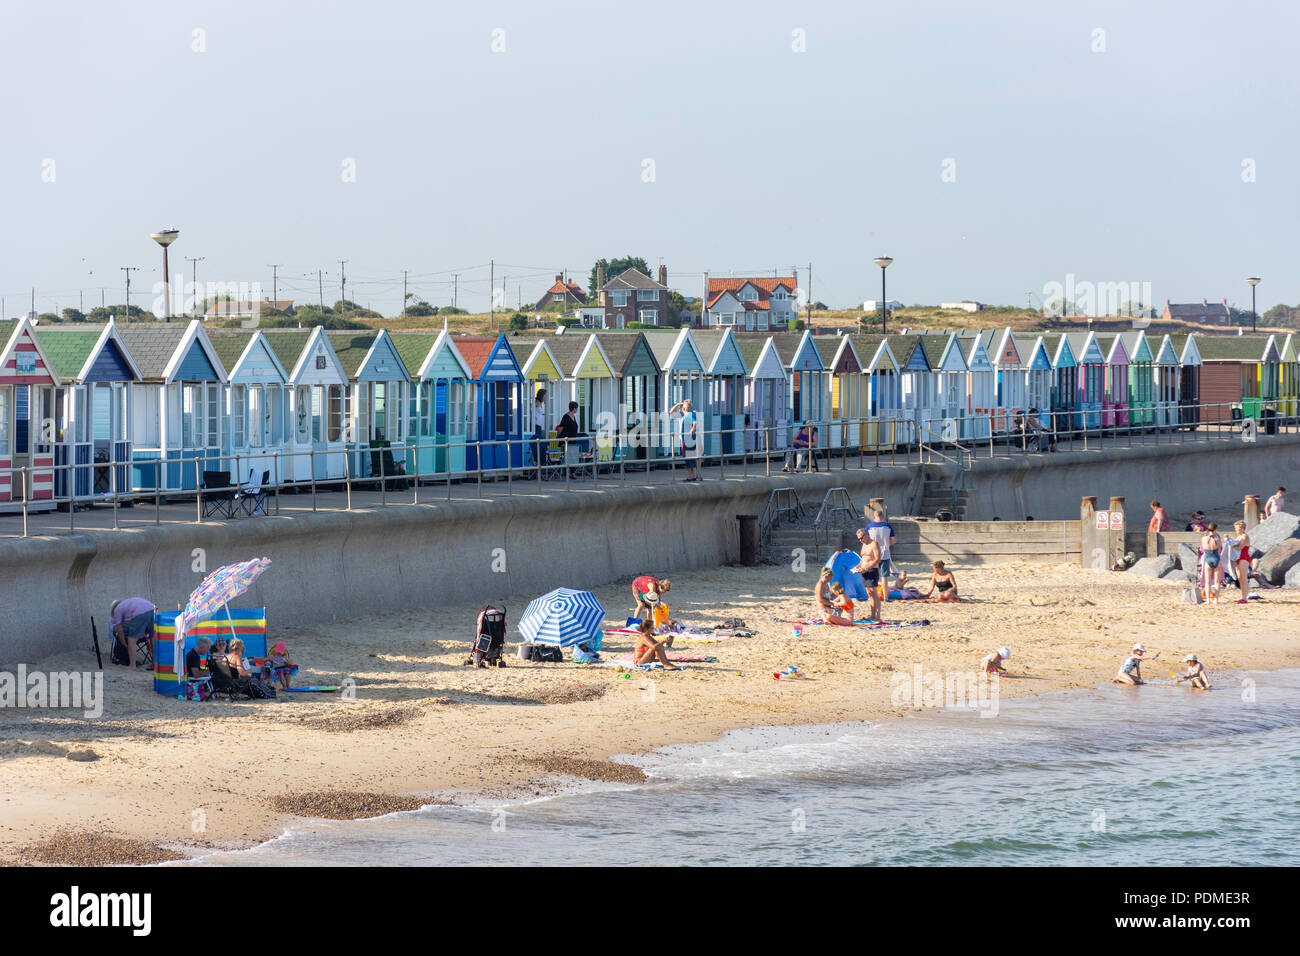 Colourful wooden beach huts on Southwold Beach, Southwold, Suffolk, England, United Kingdom Stock Photo